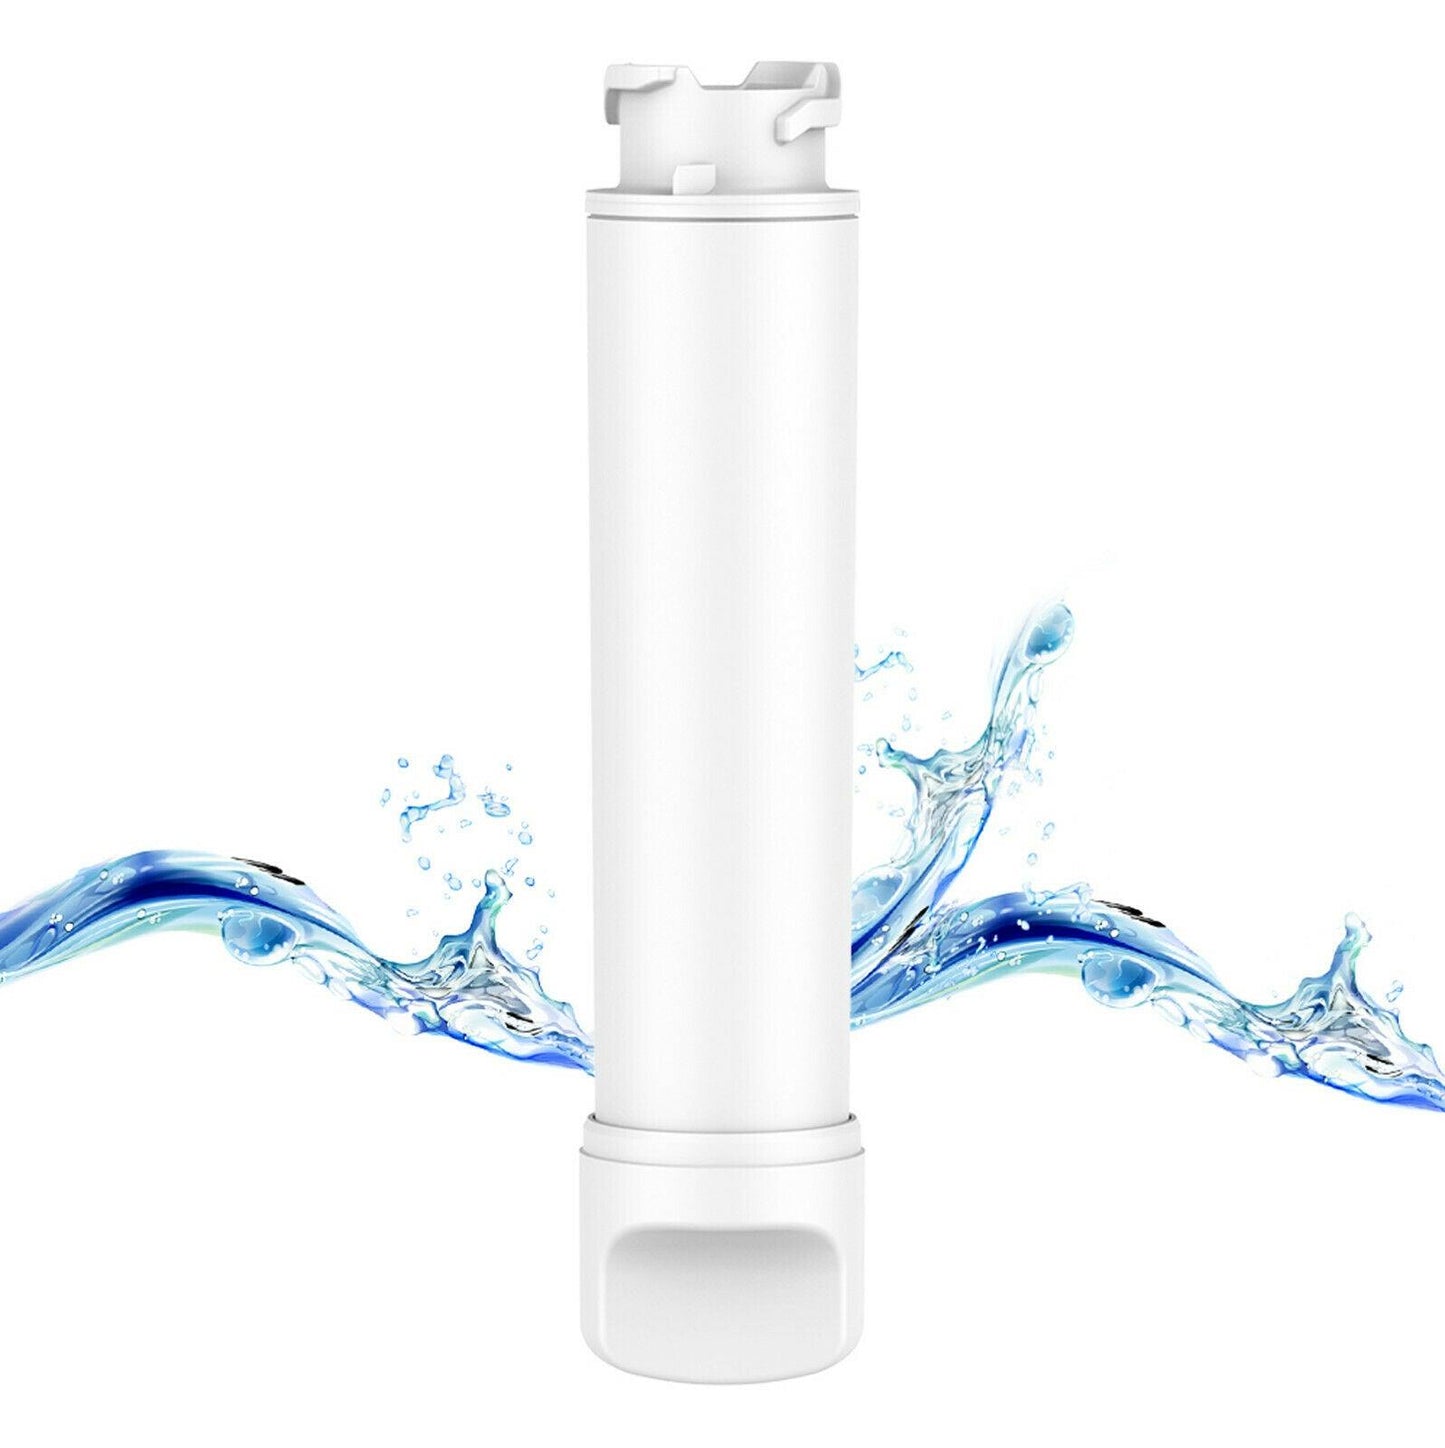 Fridge Water Filter For Electrolux Westinghouse 807946705 Unilux ULX220 M1542483 Sparesbarn